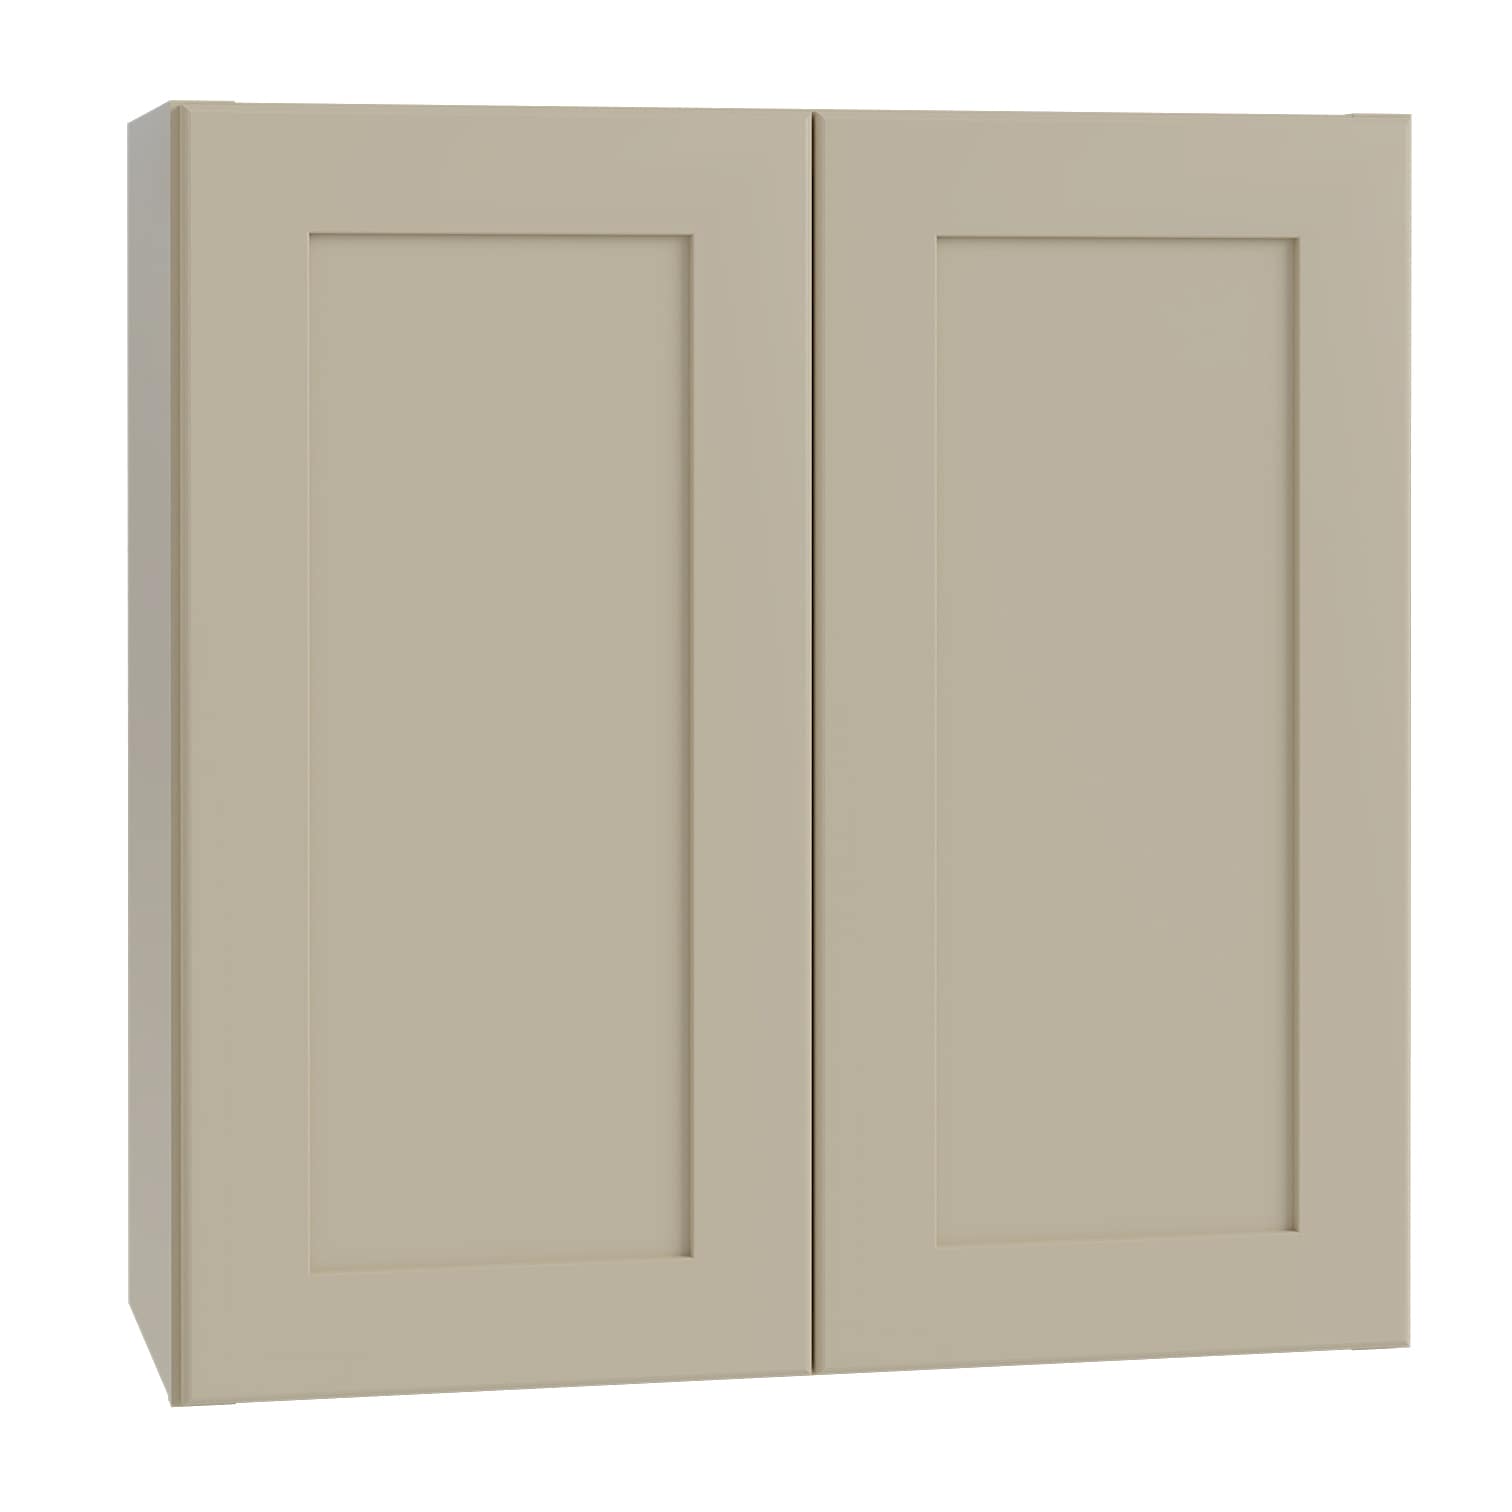 Luxxe Cabinetry 36-in W x 36-in H x 12-in D Norfolk Blended Cream Painted Door Wall Fully Assembled Semi-custom Cabinet in Off-White | W3636-NBC